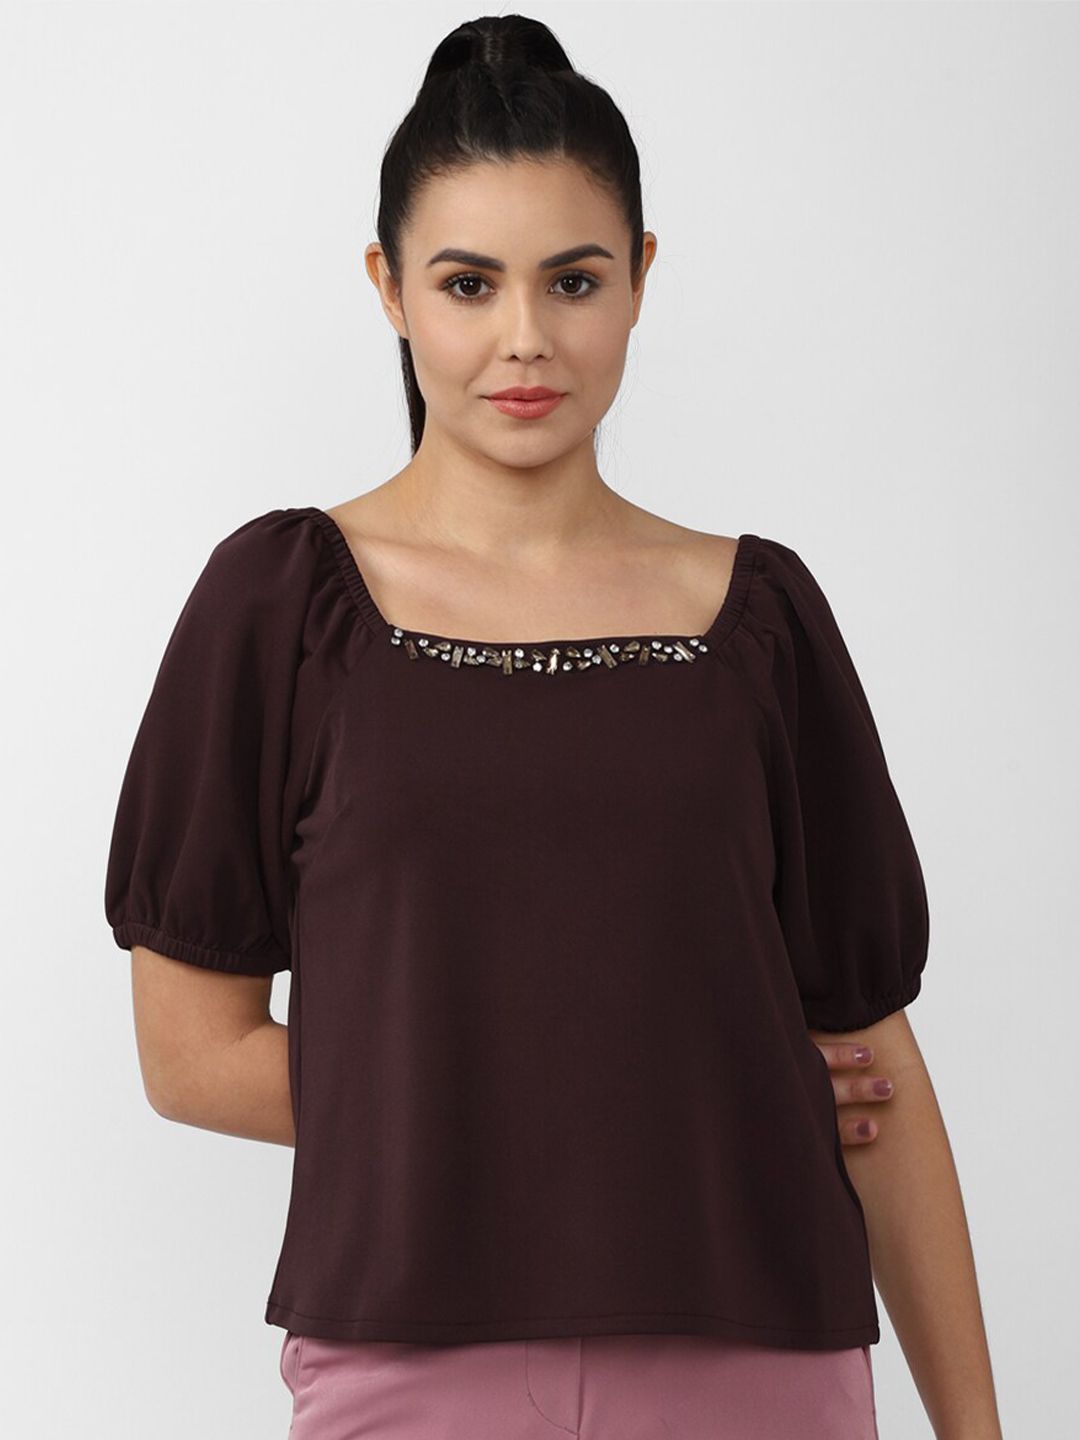 Van Heusen Woman Coffee Brown Embellished Square Neck Top Price in India